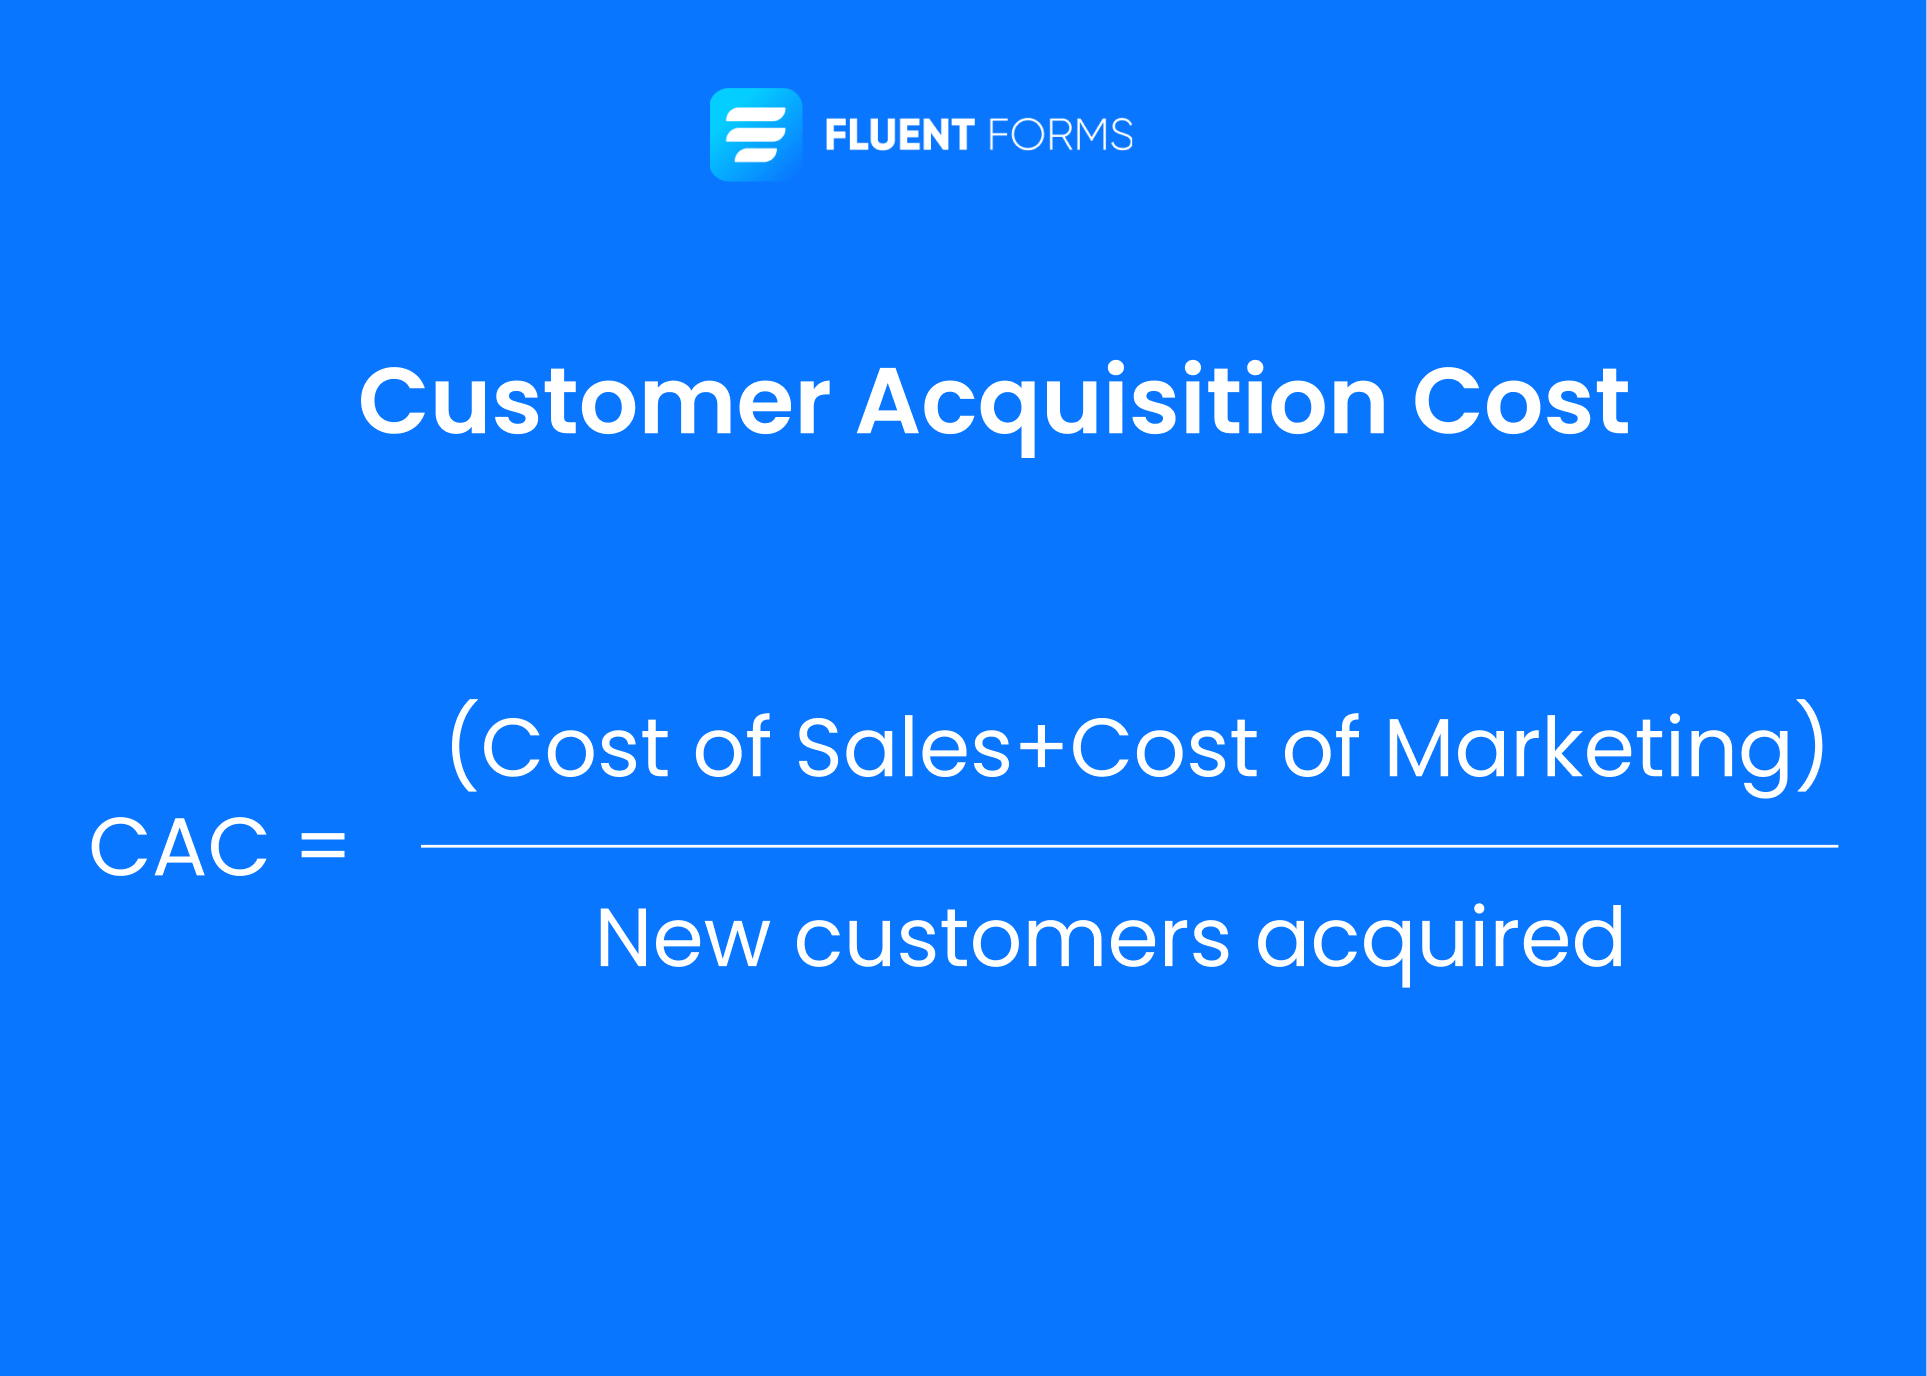 How to calculate customer acquisition cost
